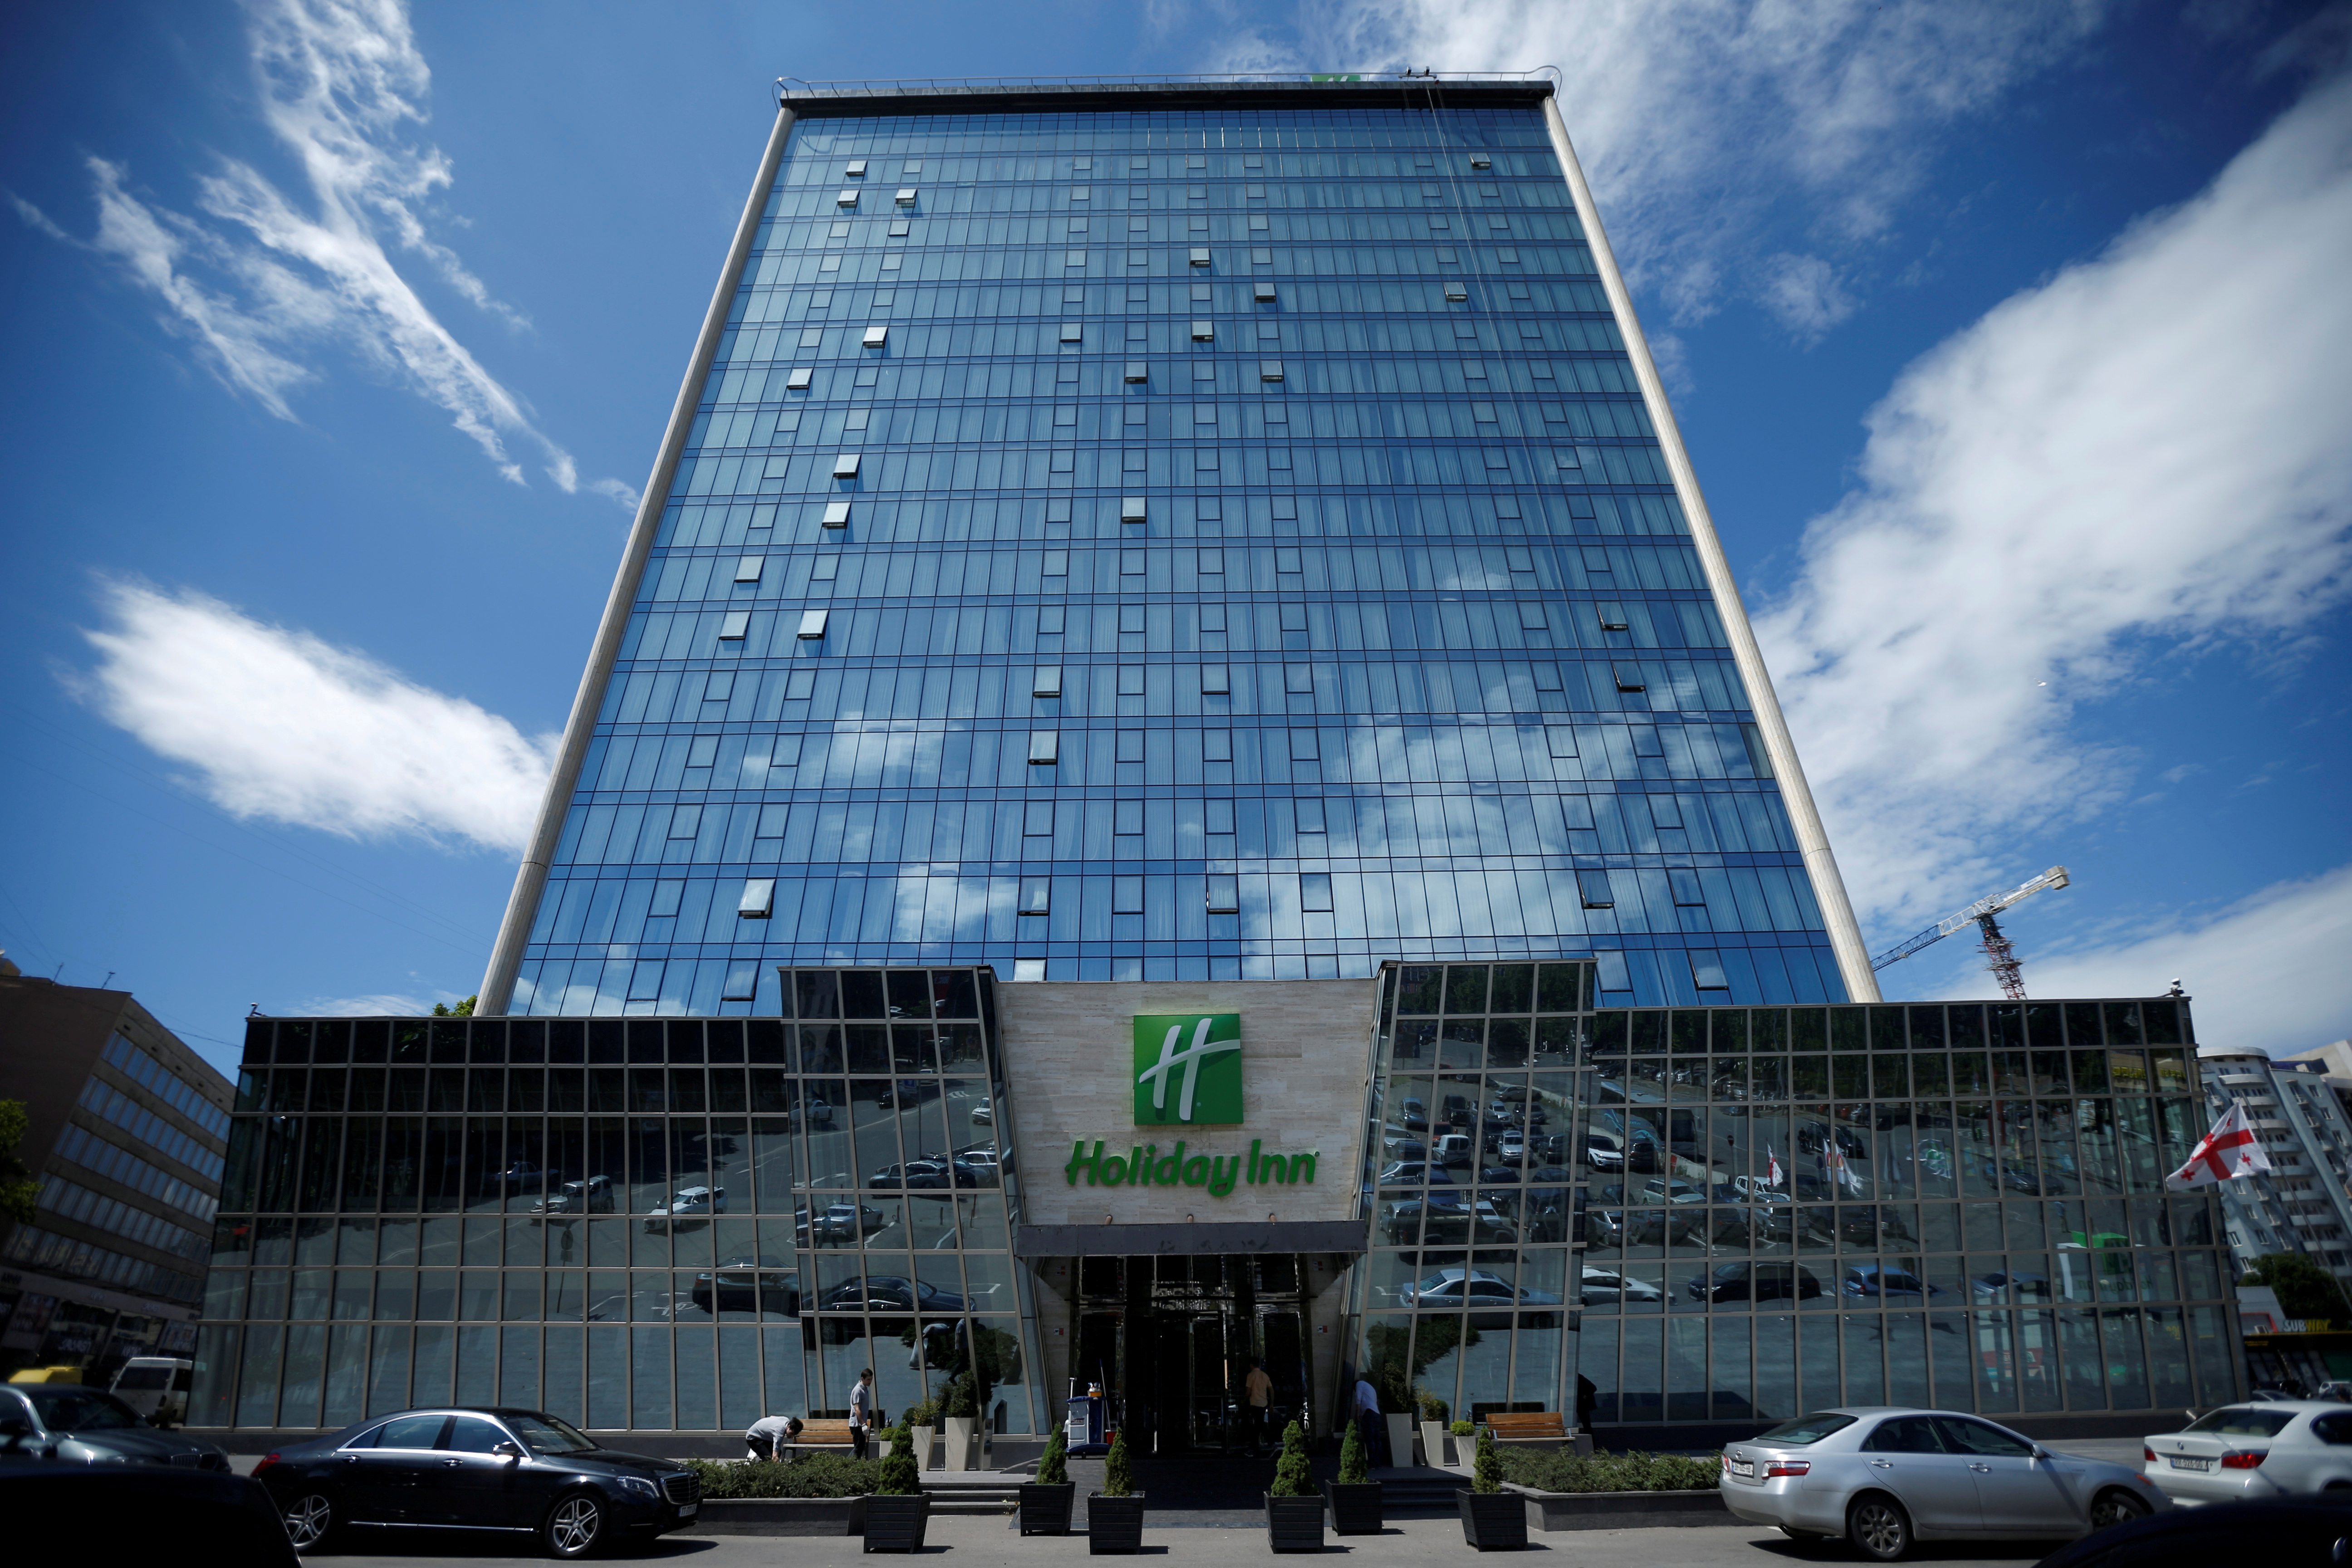 Holiday Inn hotel is seen in Tbilisi